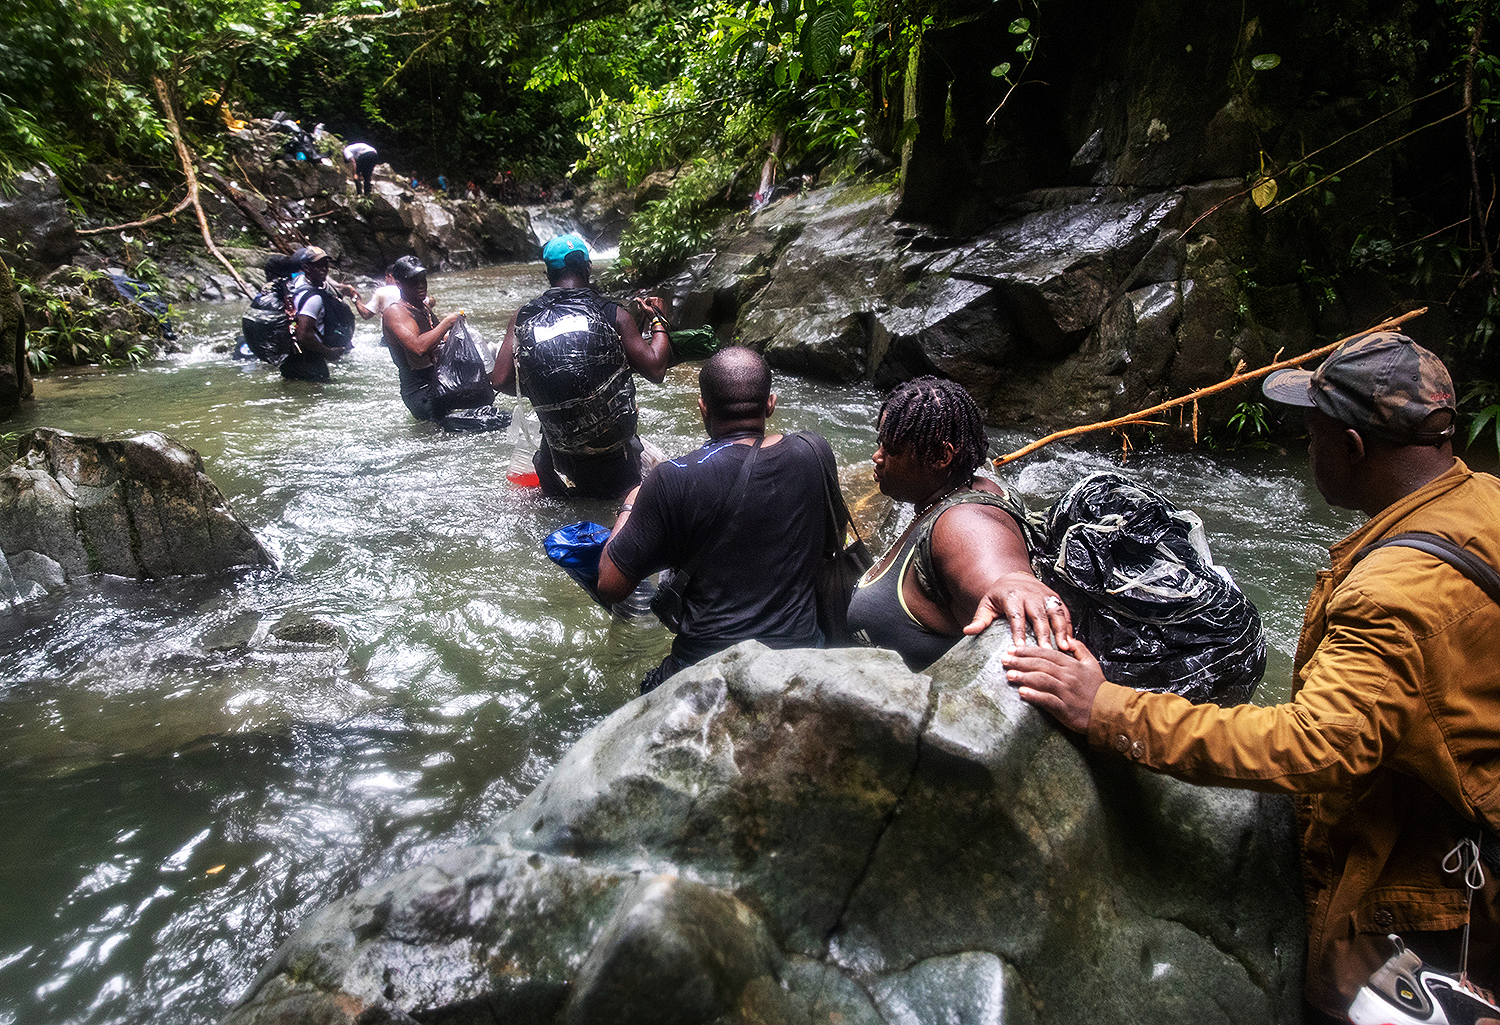 Photo of families crossing river in Darien Gap, Colombia, on October 18, 2021.